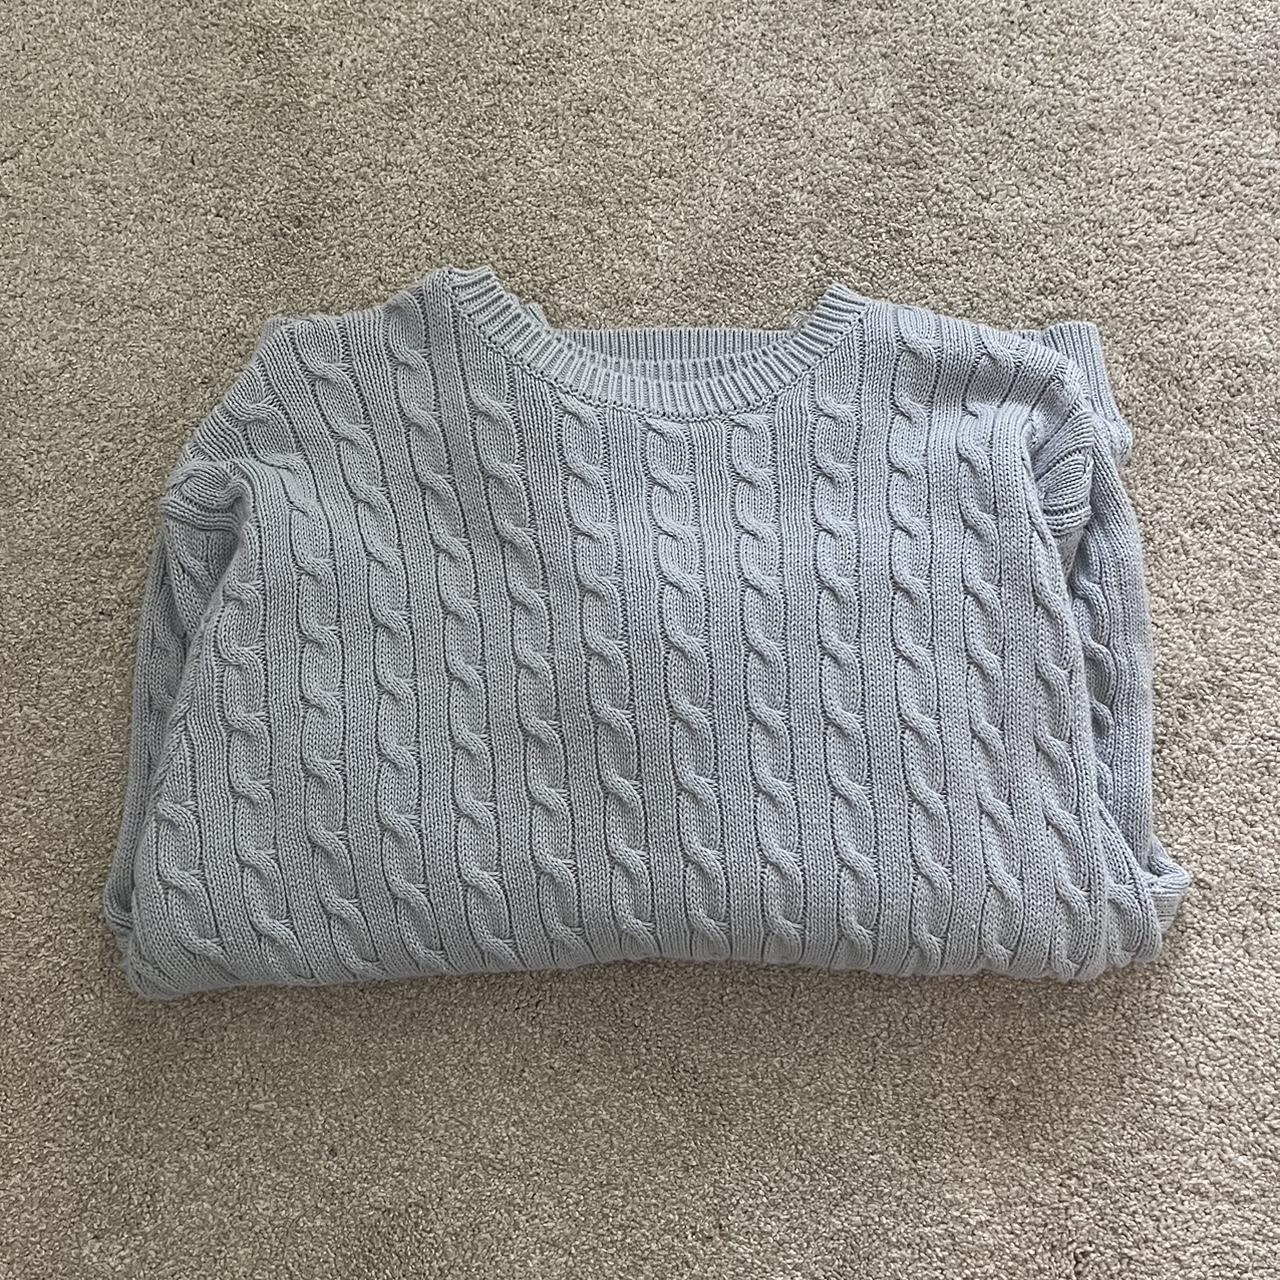 Brianna Cotton Cable Knit Brandy Melville Sweater,... - Depop